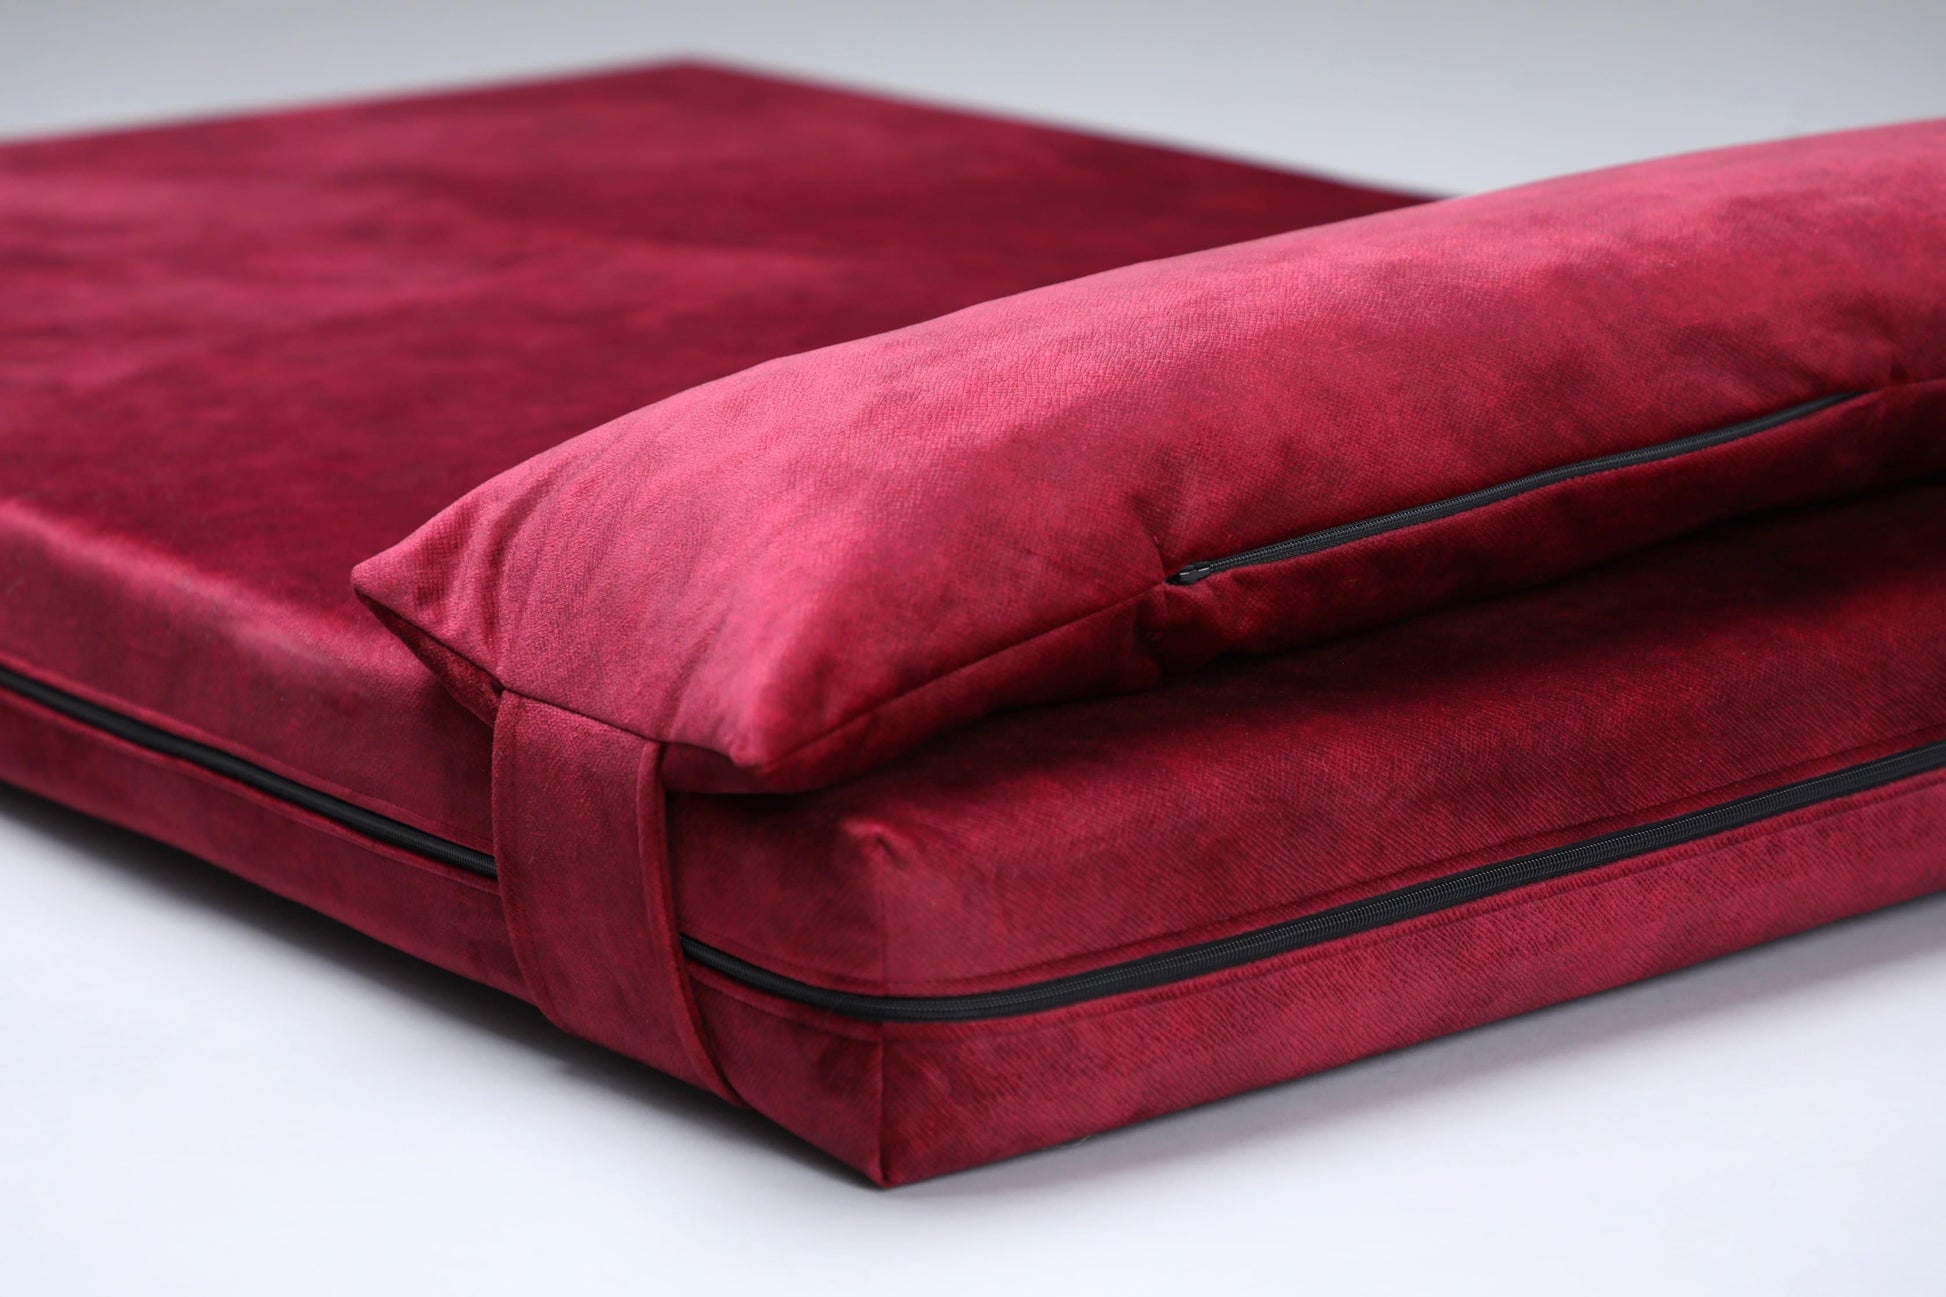 2-sided velvet dog bed. RUBY RED - European handmade dog accessories by My Wild Other